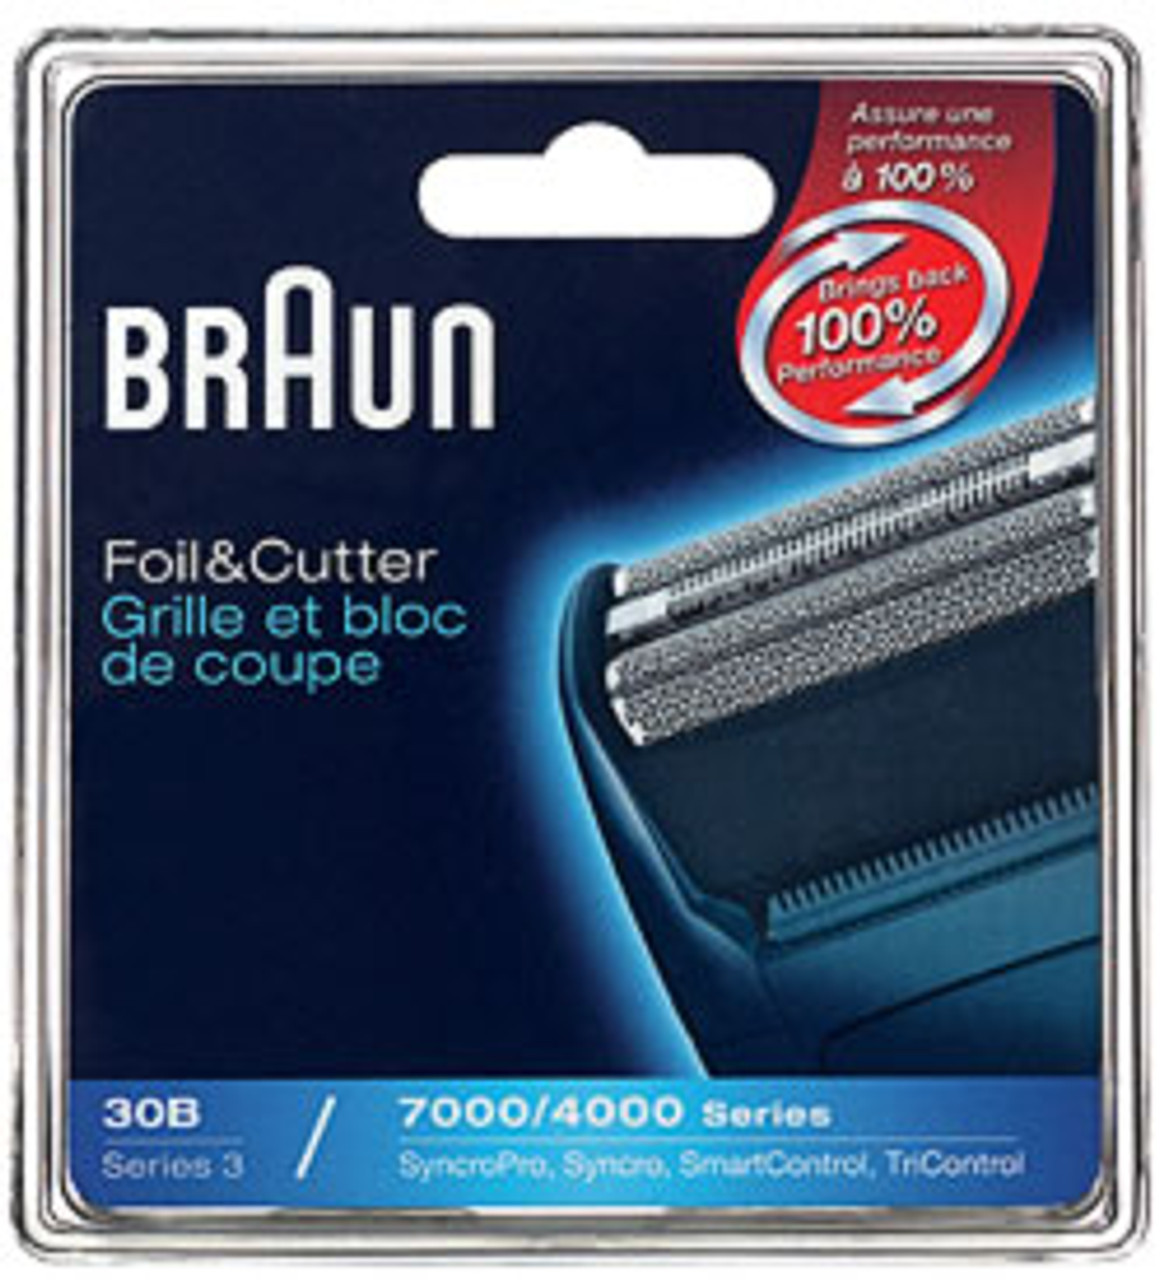  30B,310,330,340 Shaver foil &Cutter Head Shearing Blade  Replacement for Braun  310,330,340,4735,4736,4737,4747,4775,4835,4845,4875,4876,5491,5492,5493,5494,5495,5713,5714,5715,5716,5742,5743,5745  : Beauty & Personal Care